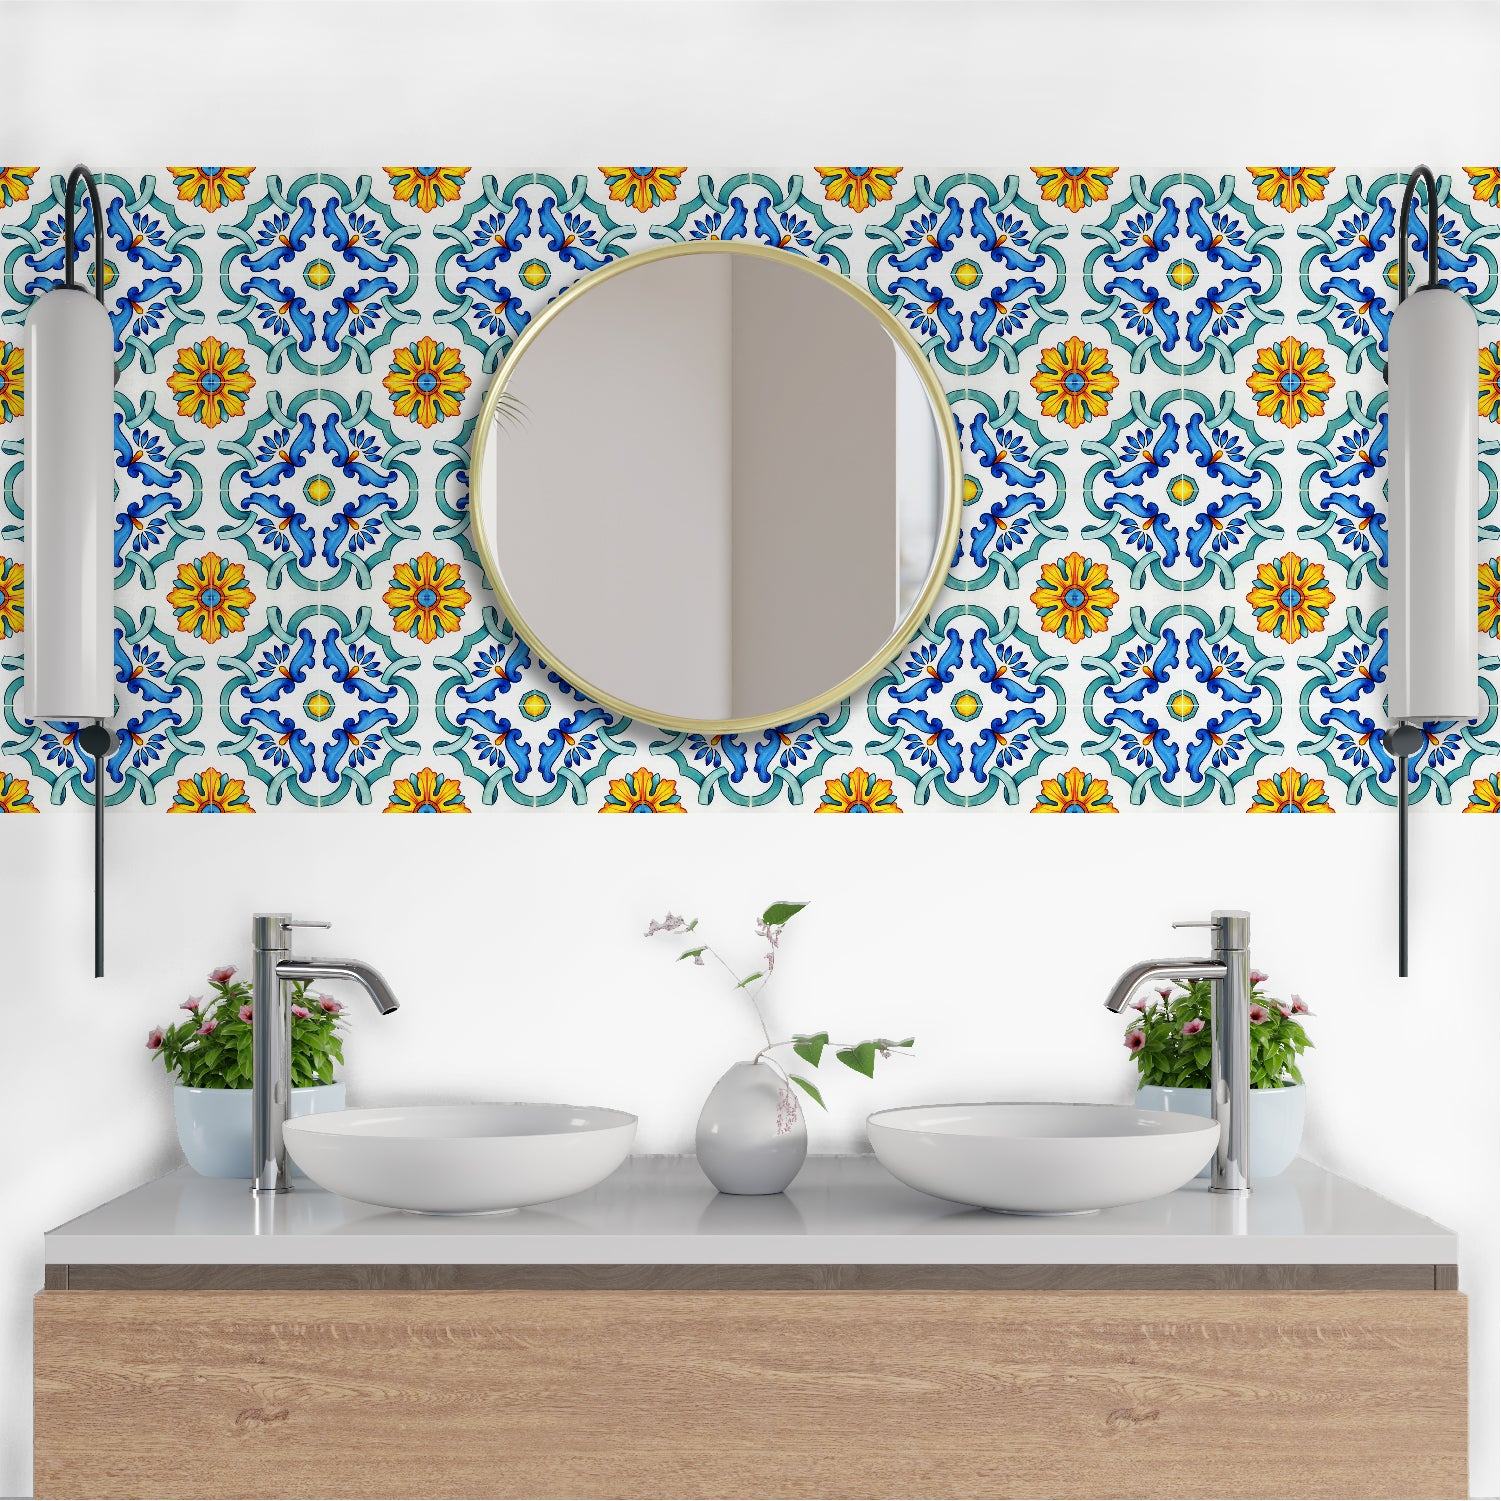 Tile Stickers Portuguese Style Tile Stickers - Mosaicowall Mosaicowall Portuguese Style Tile Stickers